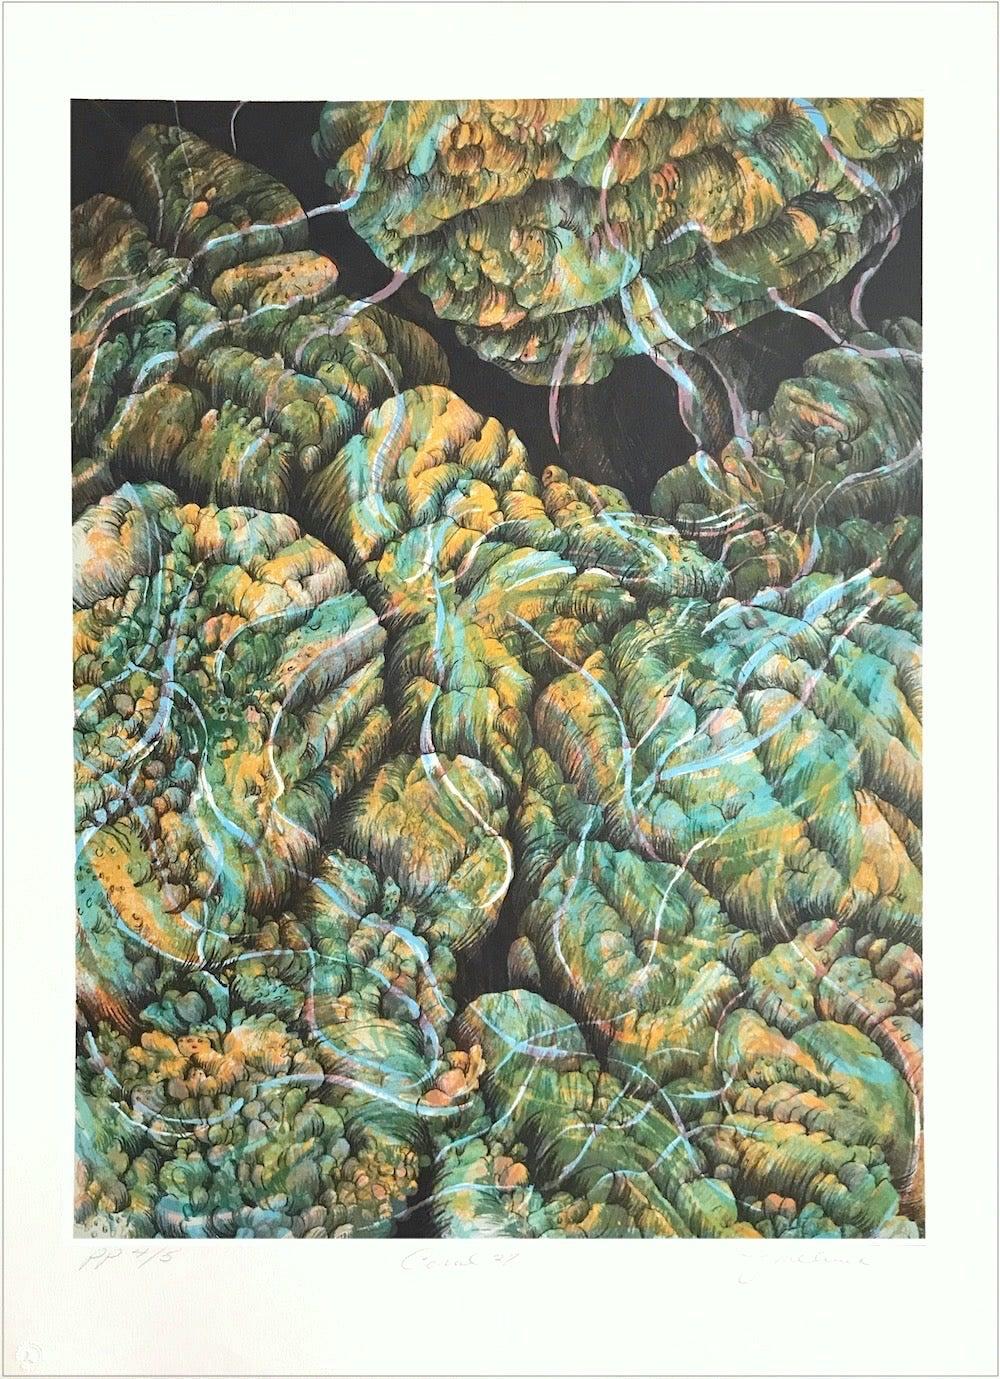 Joan Melnick Abstract Print - Coral 27: Aqua, Yellow, Signed Lithograph, Nature Abstract, Coral Reef, Water